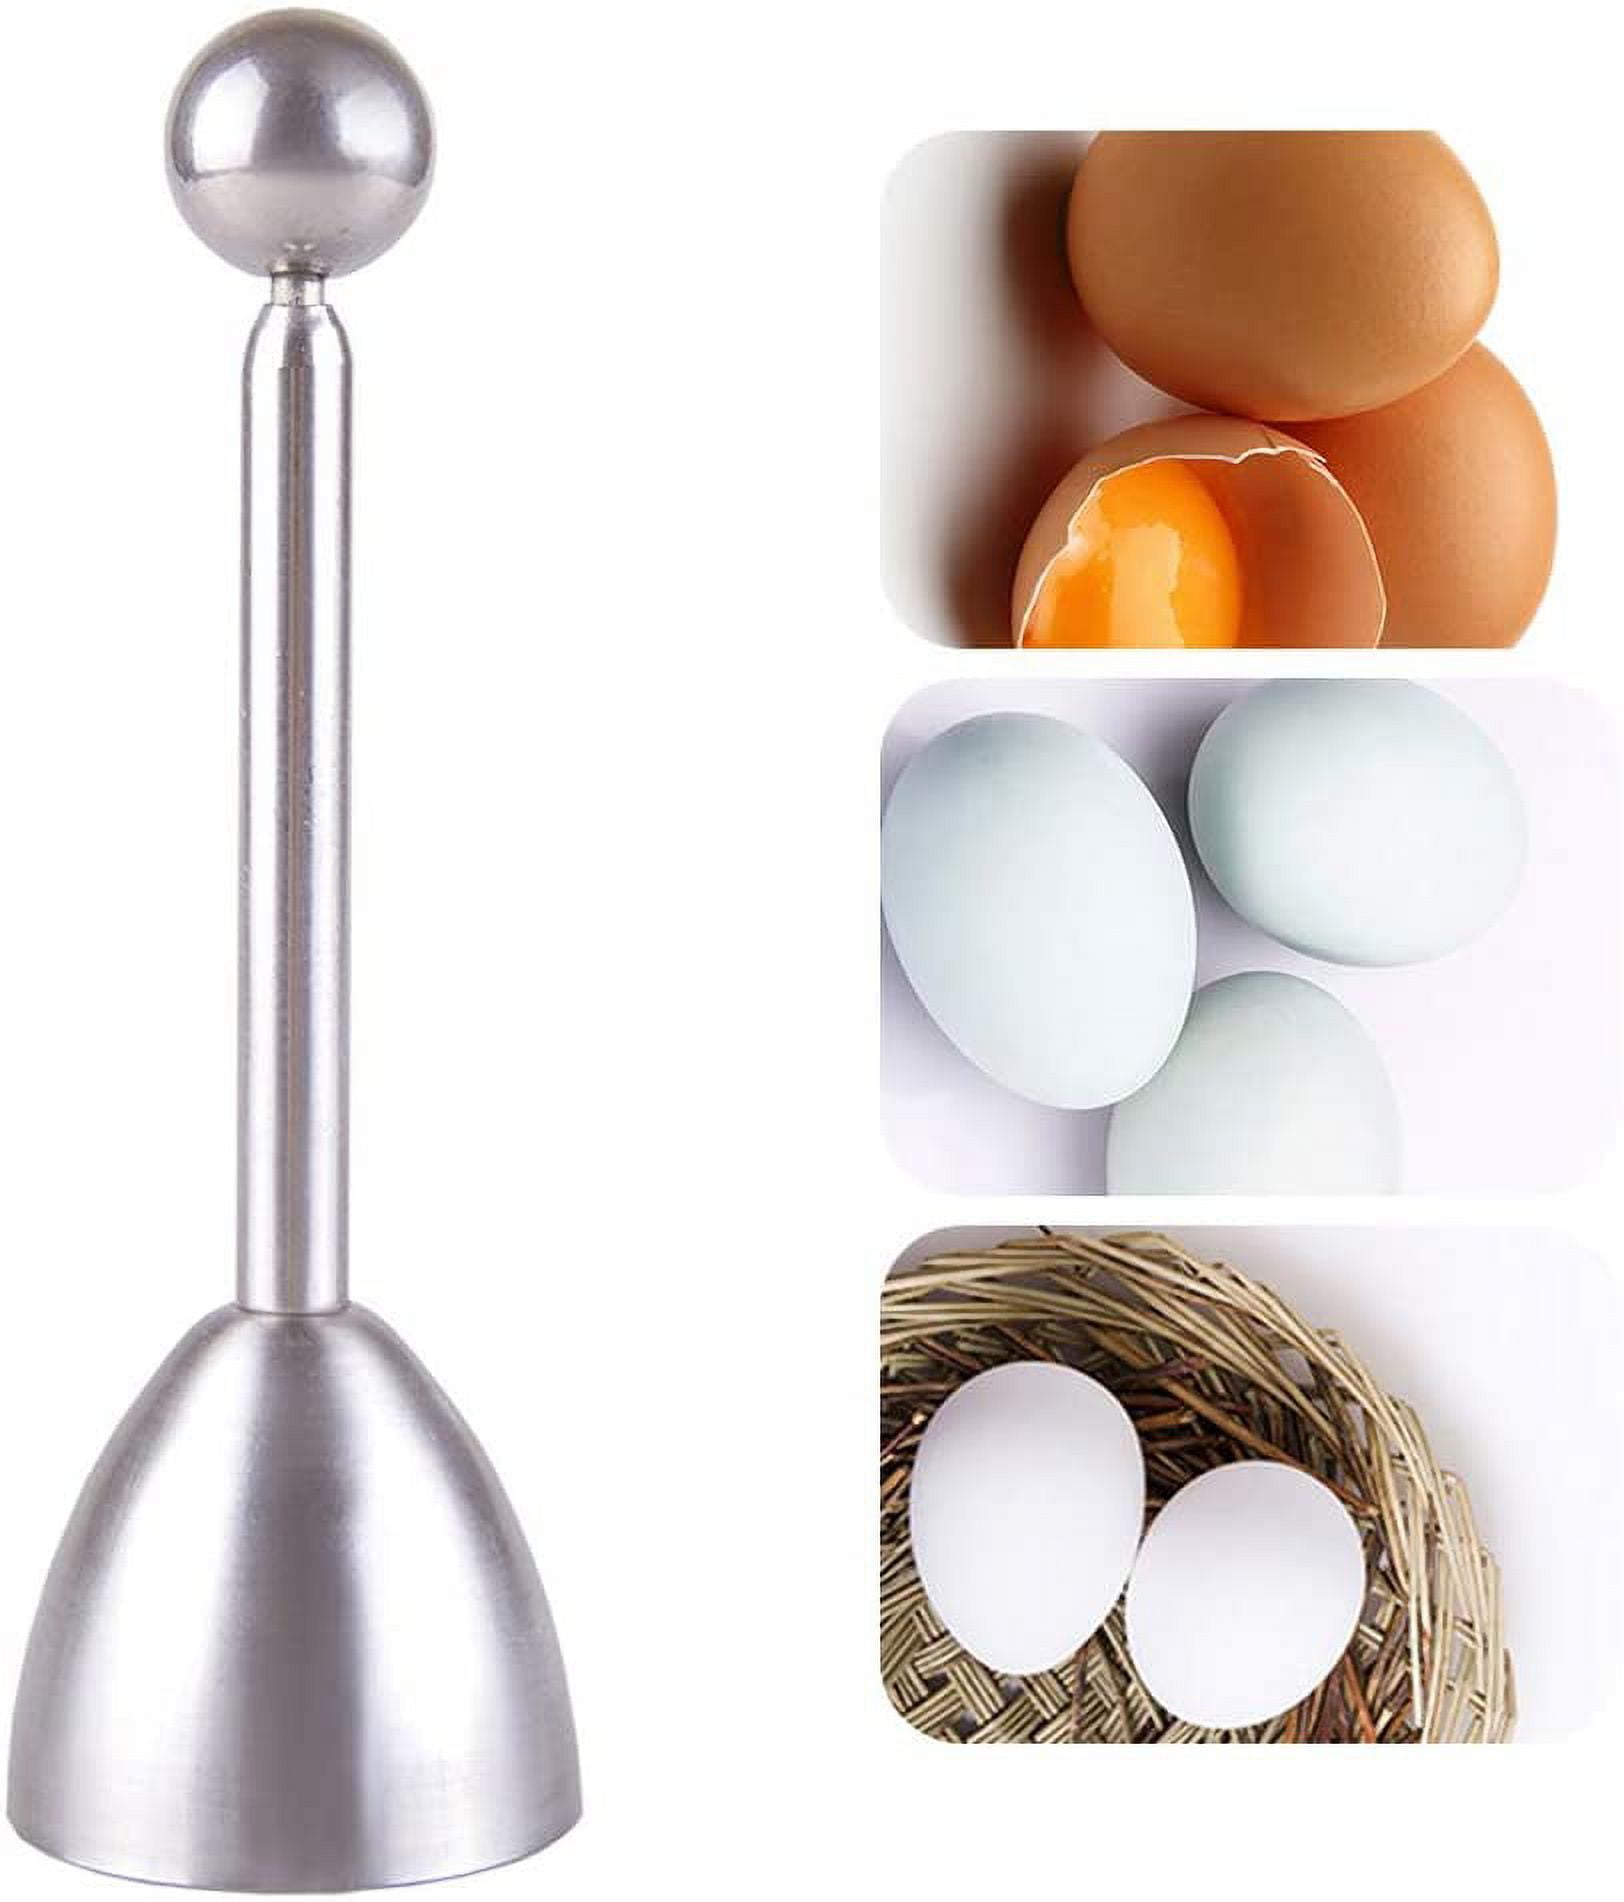 TureClos Egg Piercer Pricker Dividers Hole Puncher Cracker Boiled Eggs  Stainless Steel Separator DIY Cooking Tools Gadgets Kitchenware